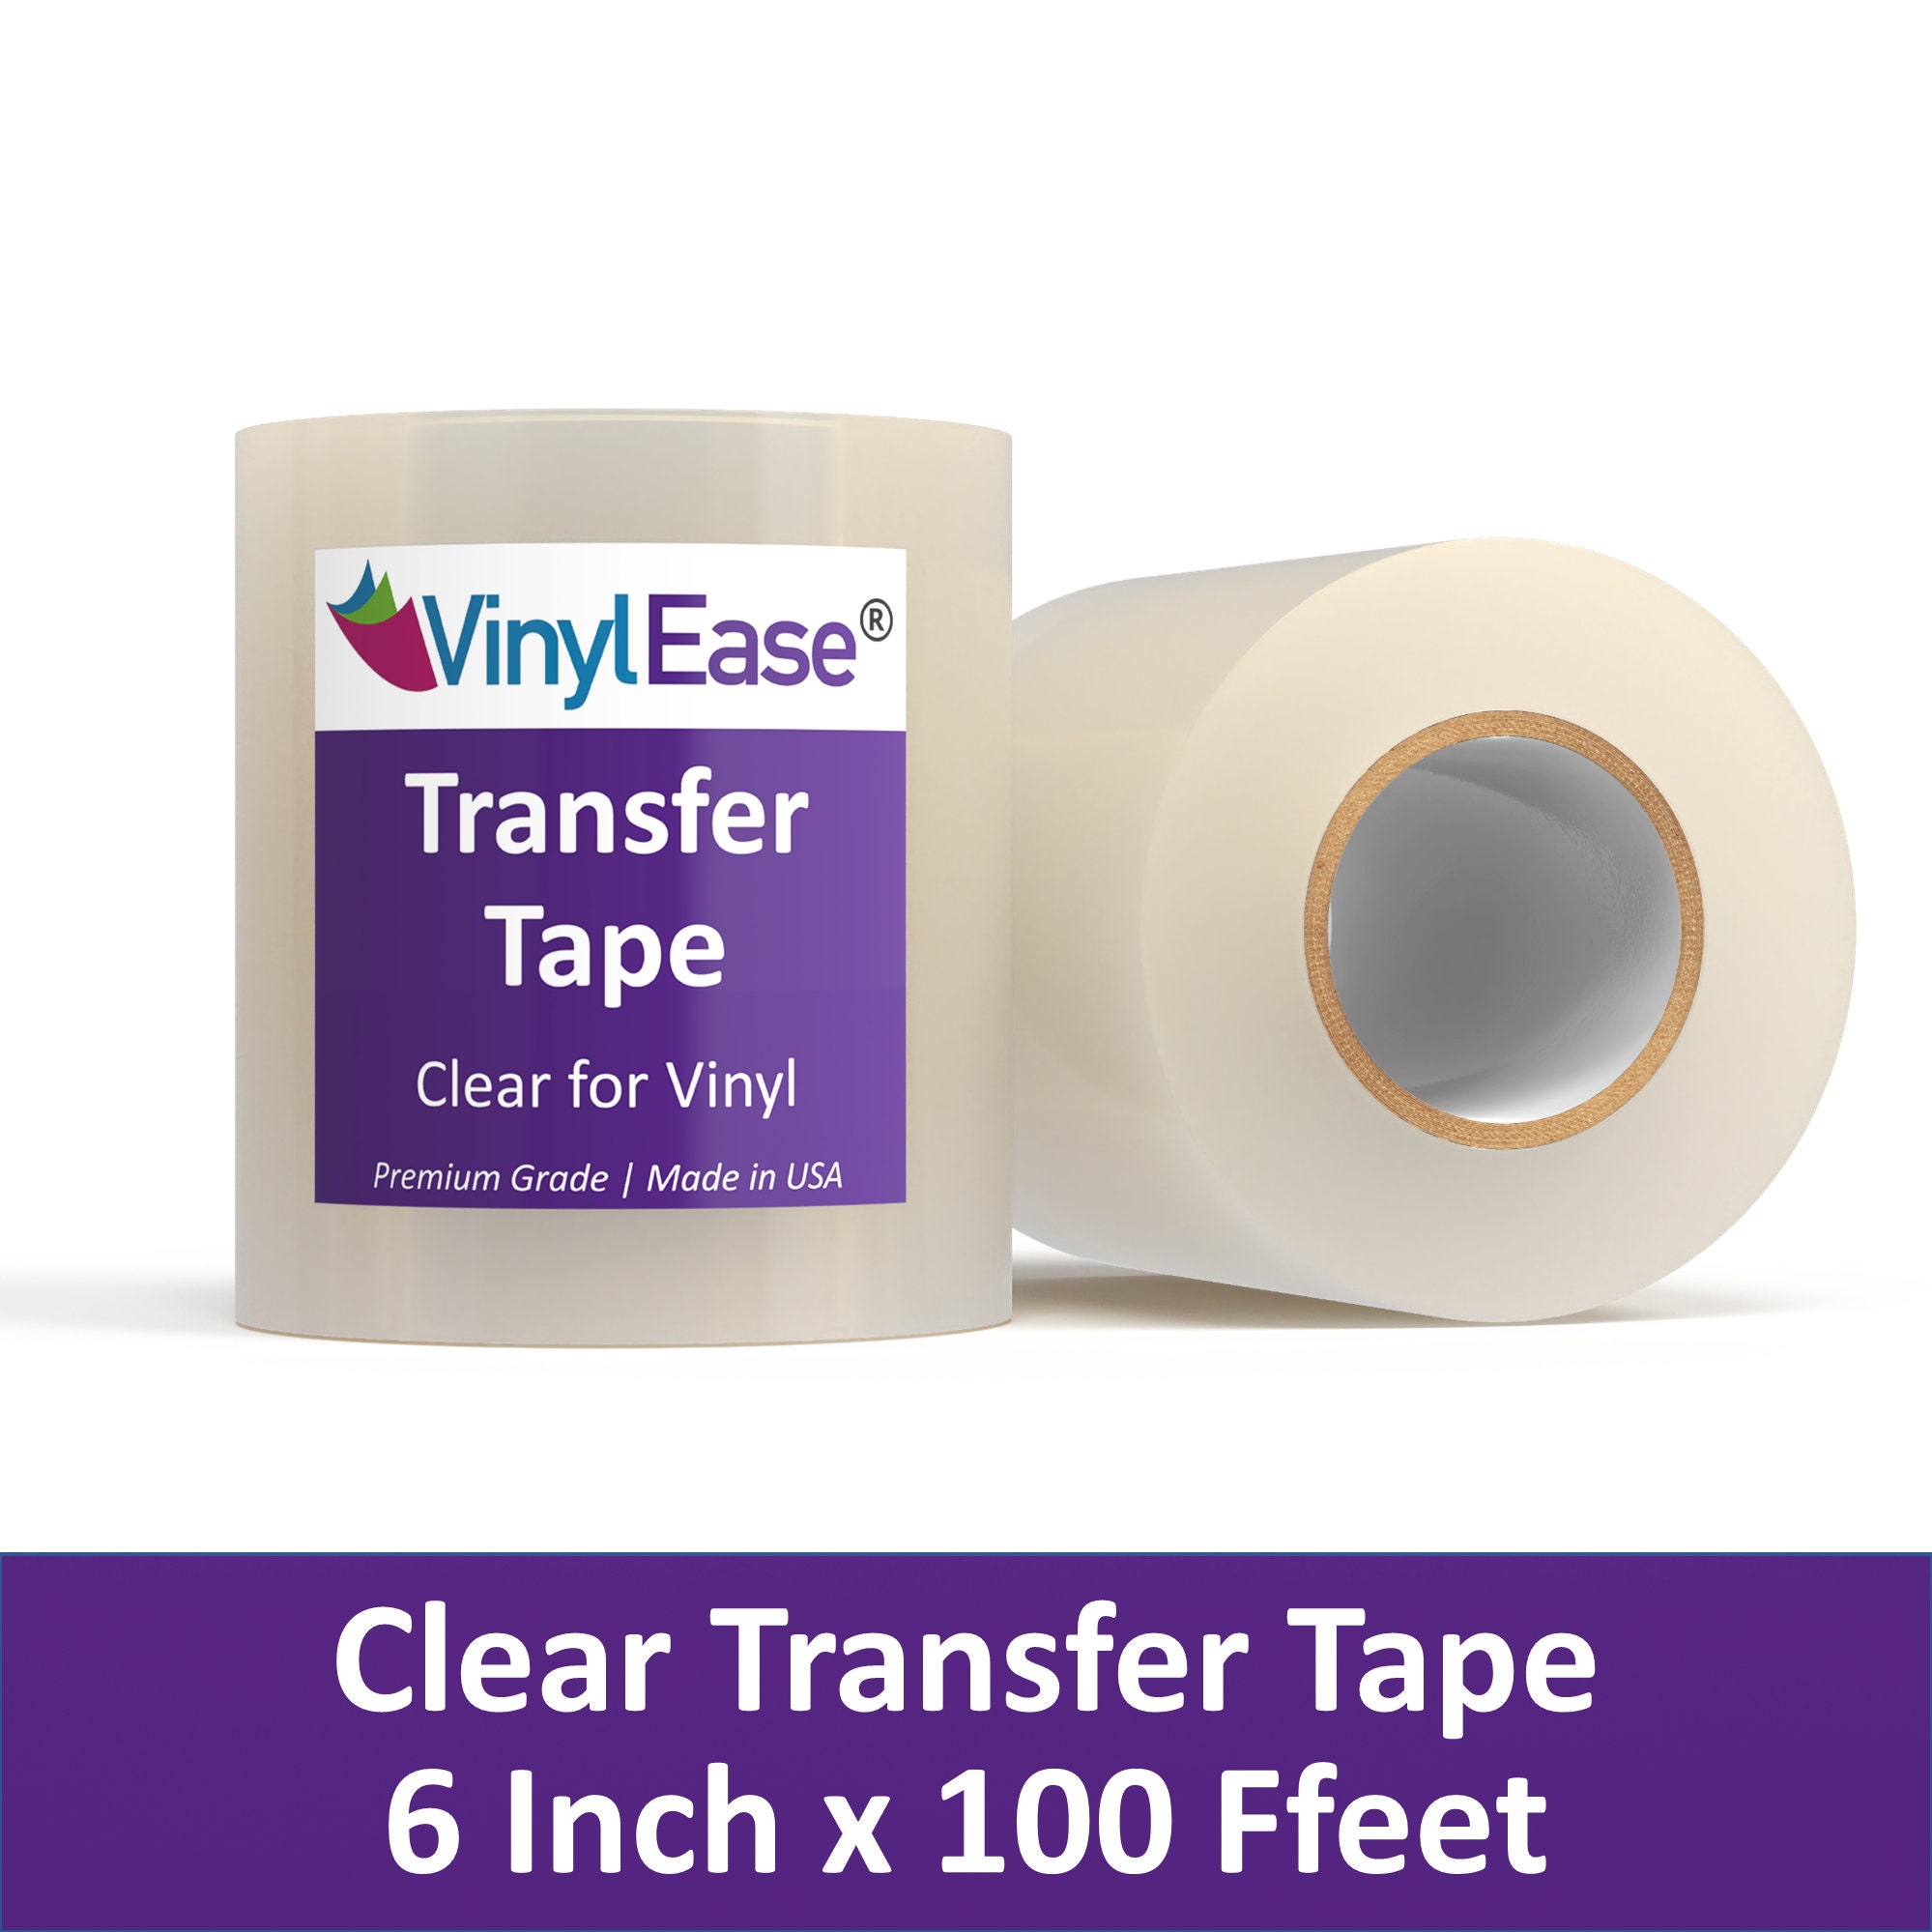 Vinyl Ease 12 inch x 300 feet roll of Clear Vinyl Transfer Tape with a HIGH  Tack Layflat Adhesive. American Made Application Tape for Craft Cutters